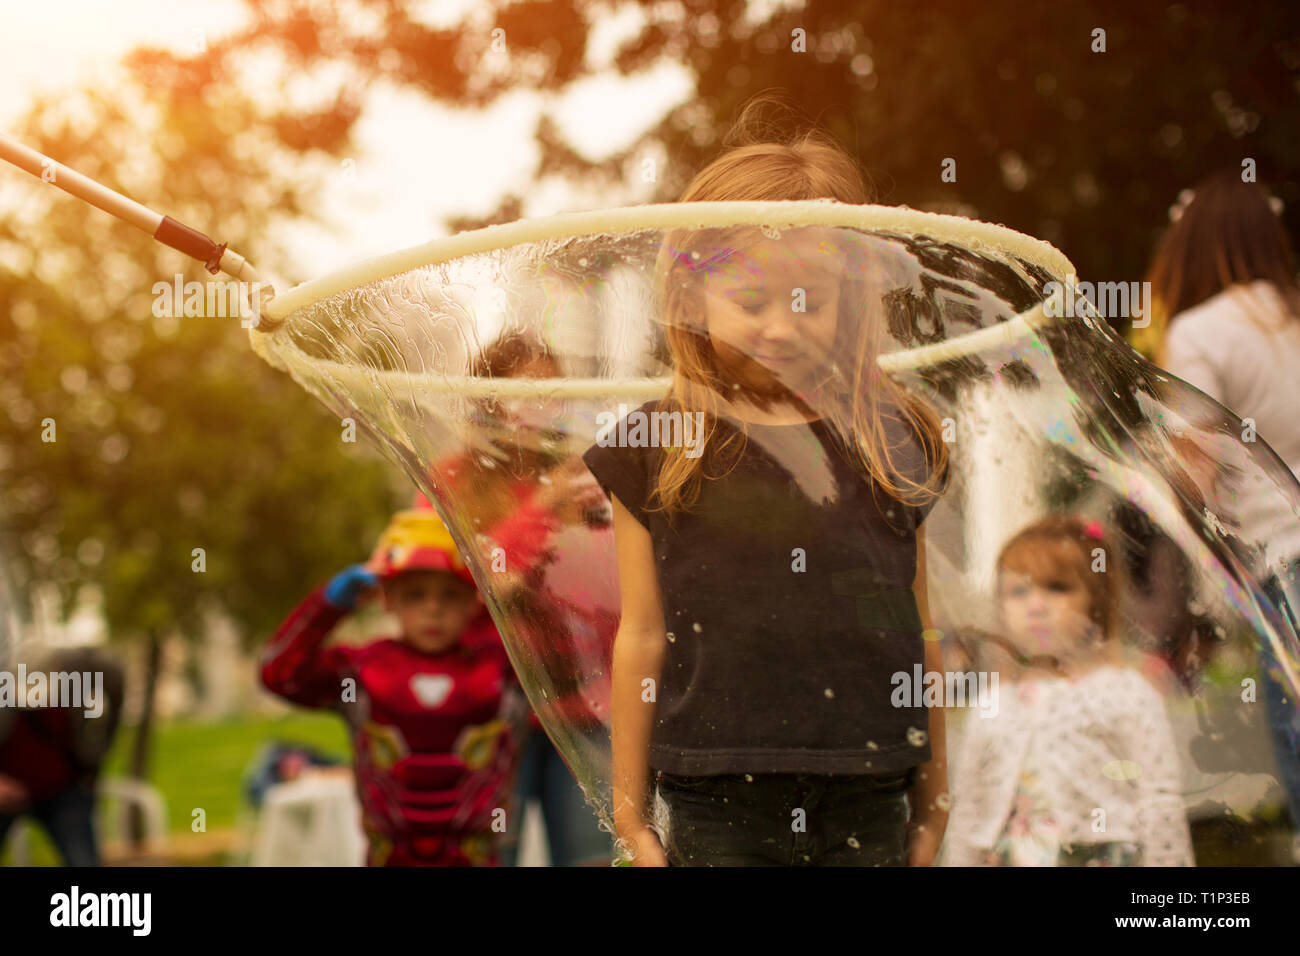 Baby girl stands in a huge soap bubble on, a holiday fun for children Stock Photo